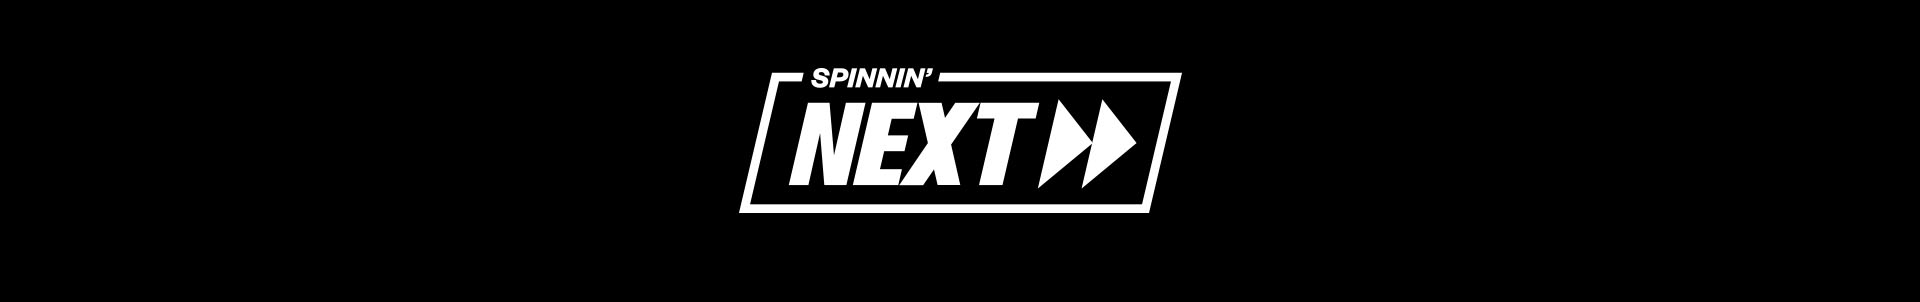 Check out the first episode of Spinnin' NEXT!